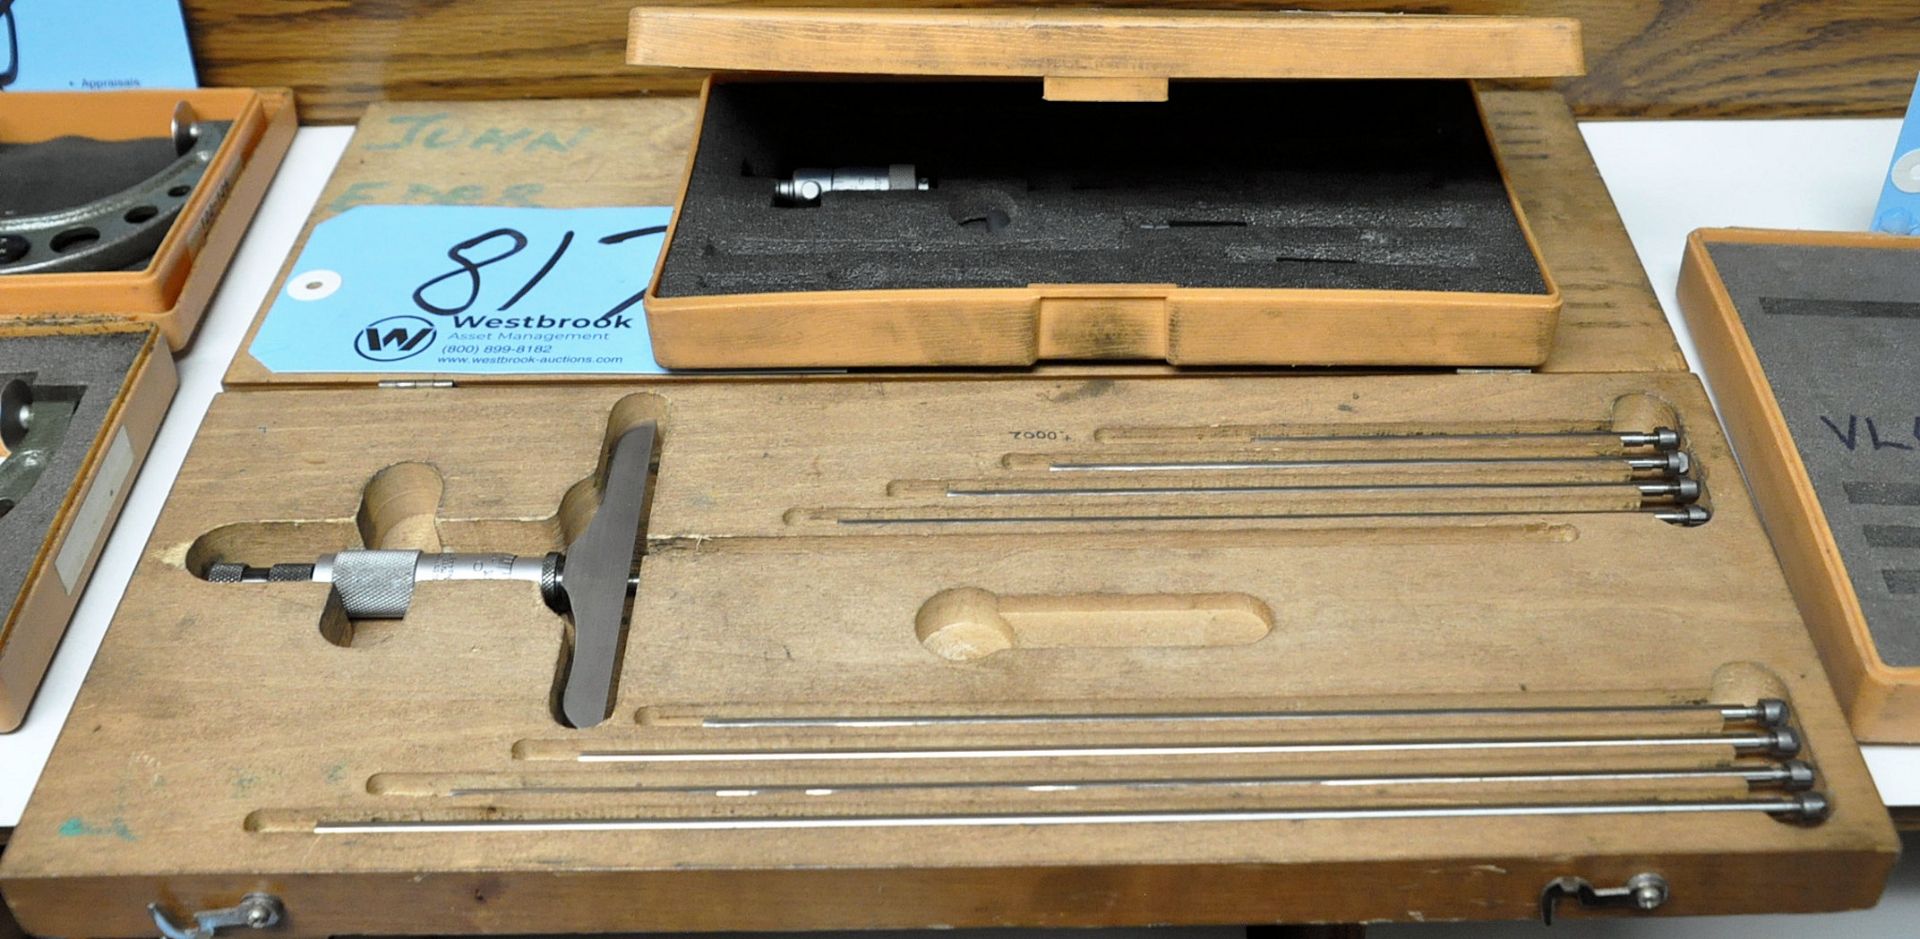 Lot-(1) Starrett, (1) Mitutoyo and (1) No Name Depth Micrometer Sets with Cases - Image 3 of 4